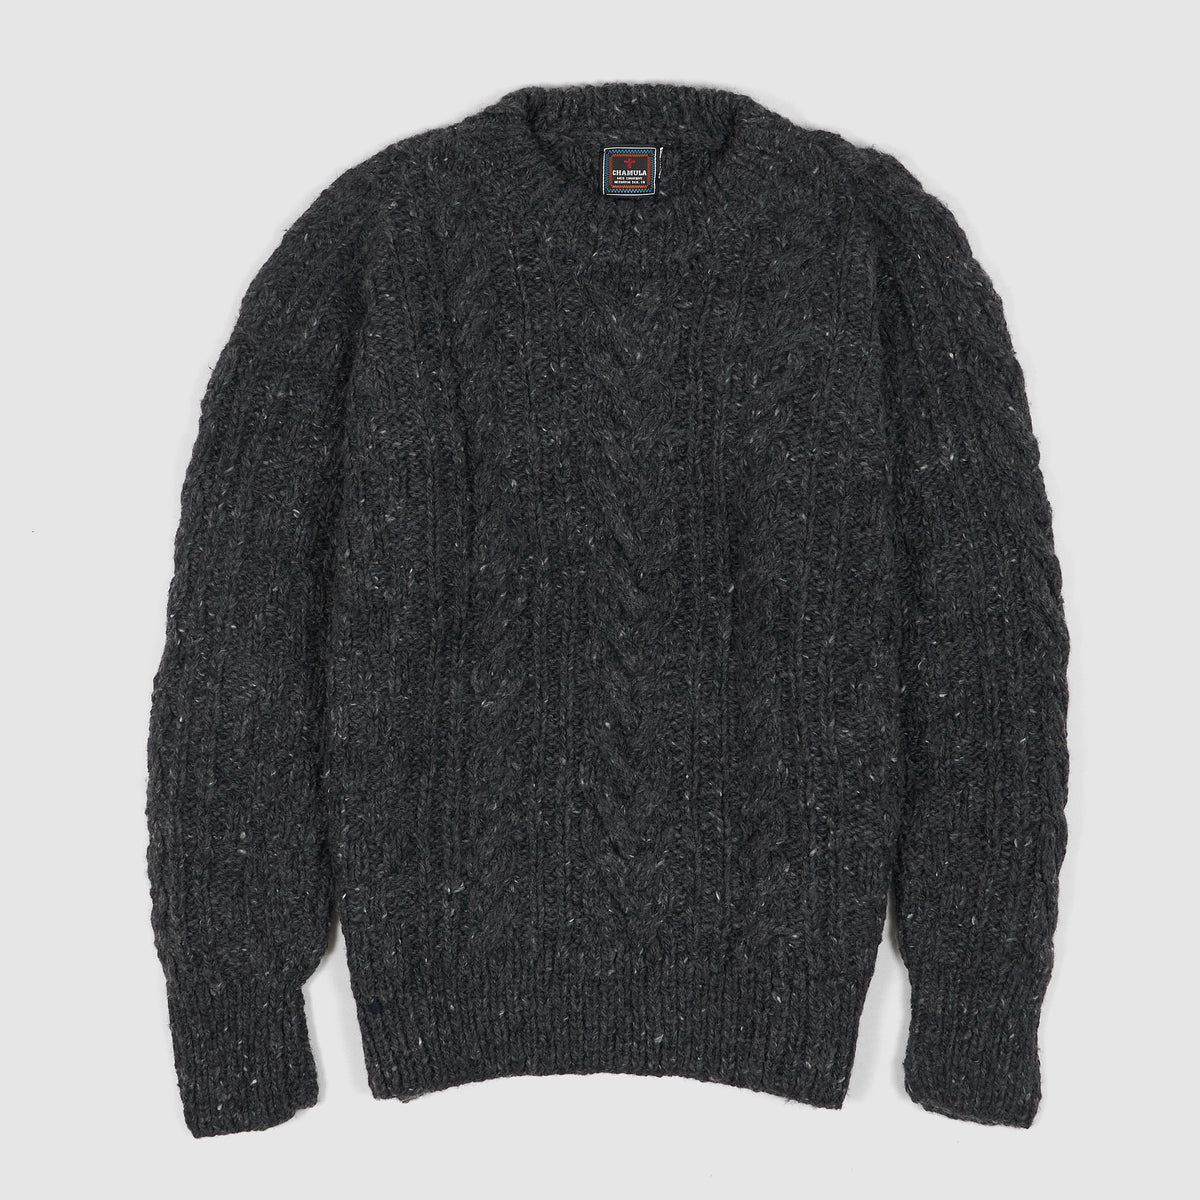 Chamula Cable Knit Fisherman Crew Neck Pullover